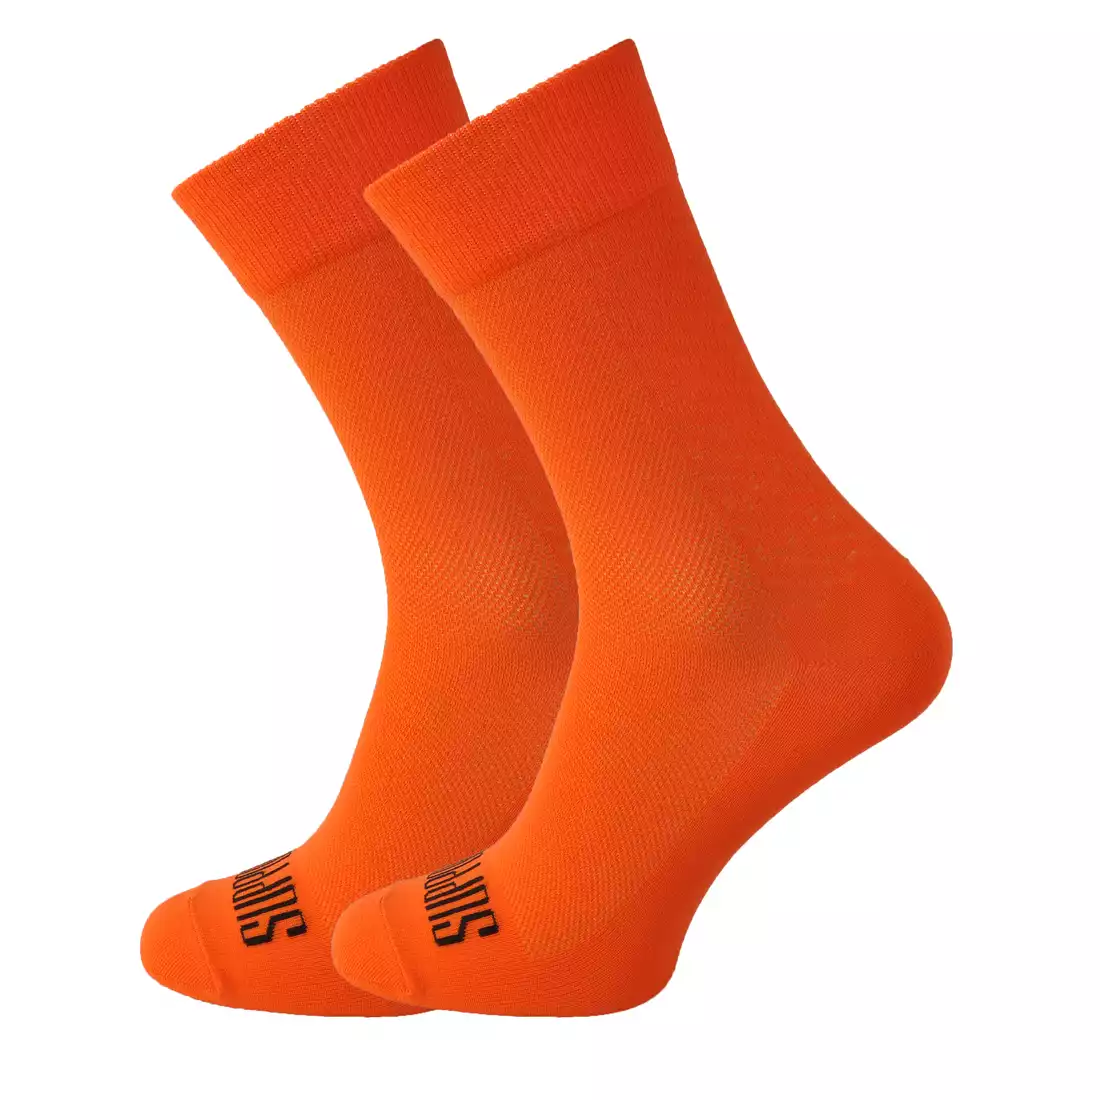 hide request Pig SUPPORTSPORT cycling socks S-LIGHT orange | MikeSPORT